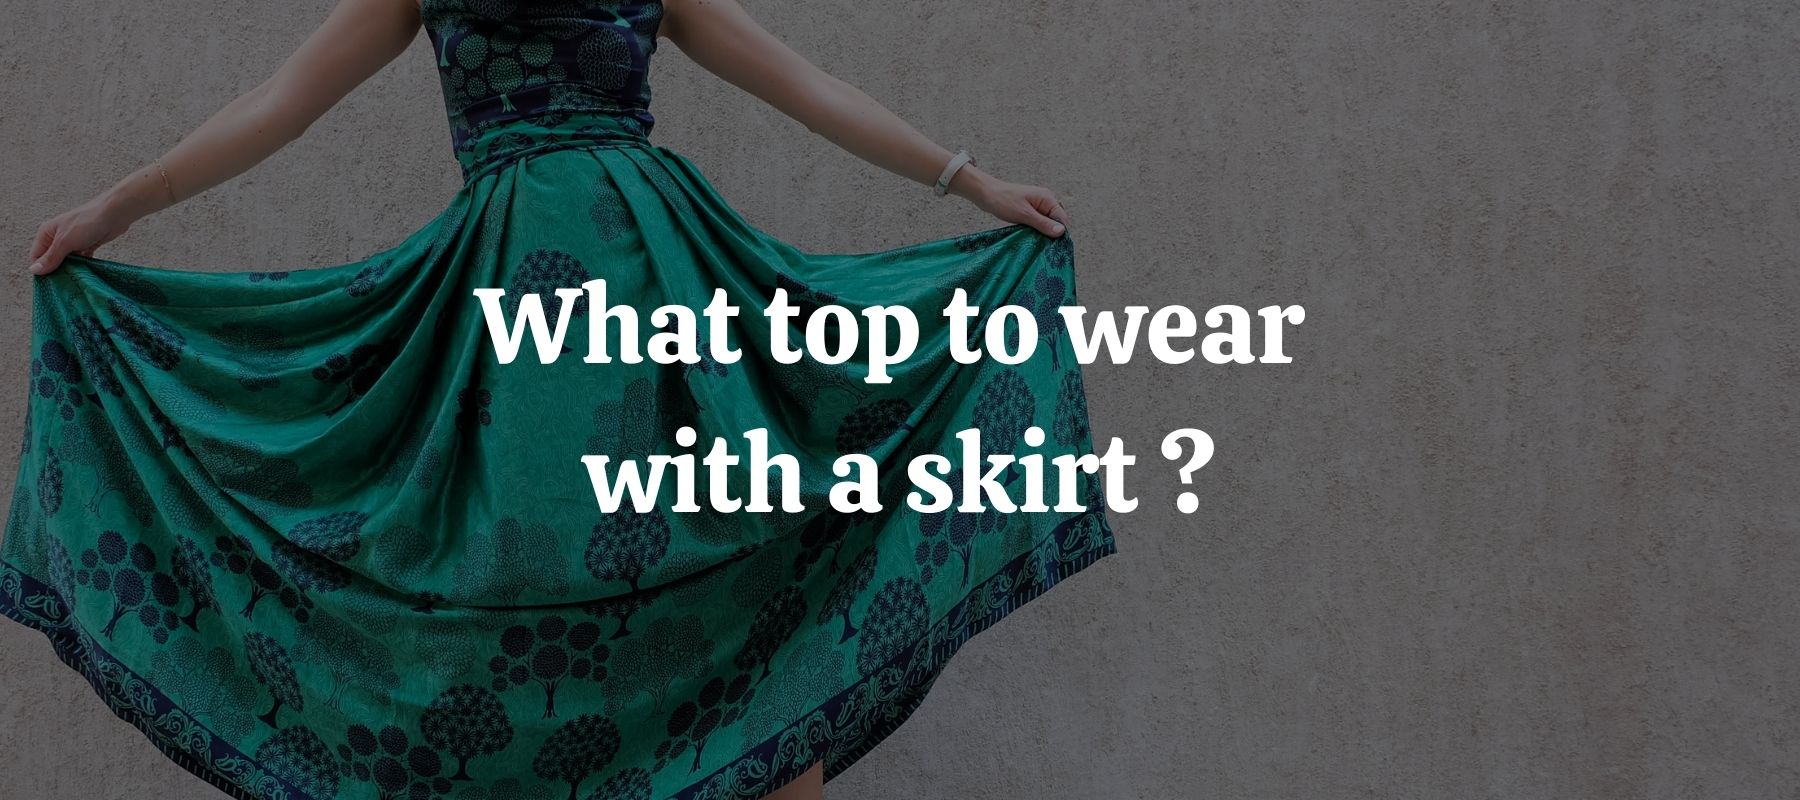 What top to wear with a skirt